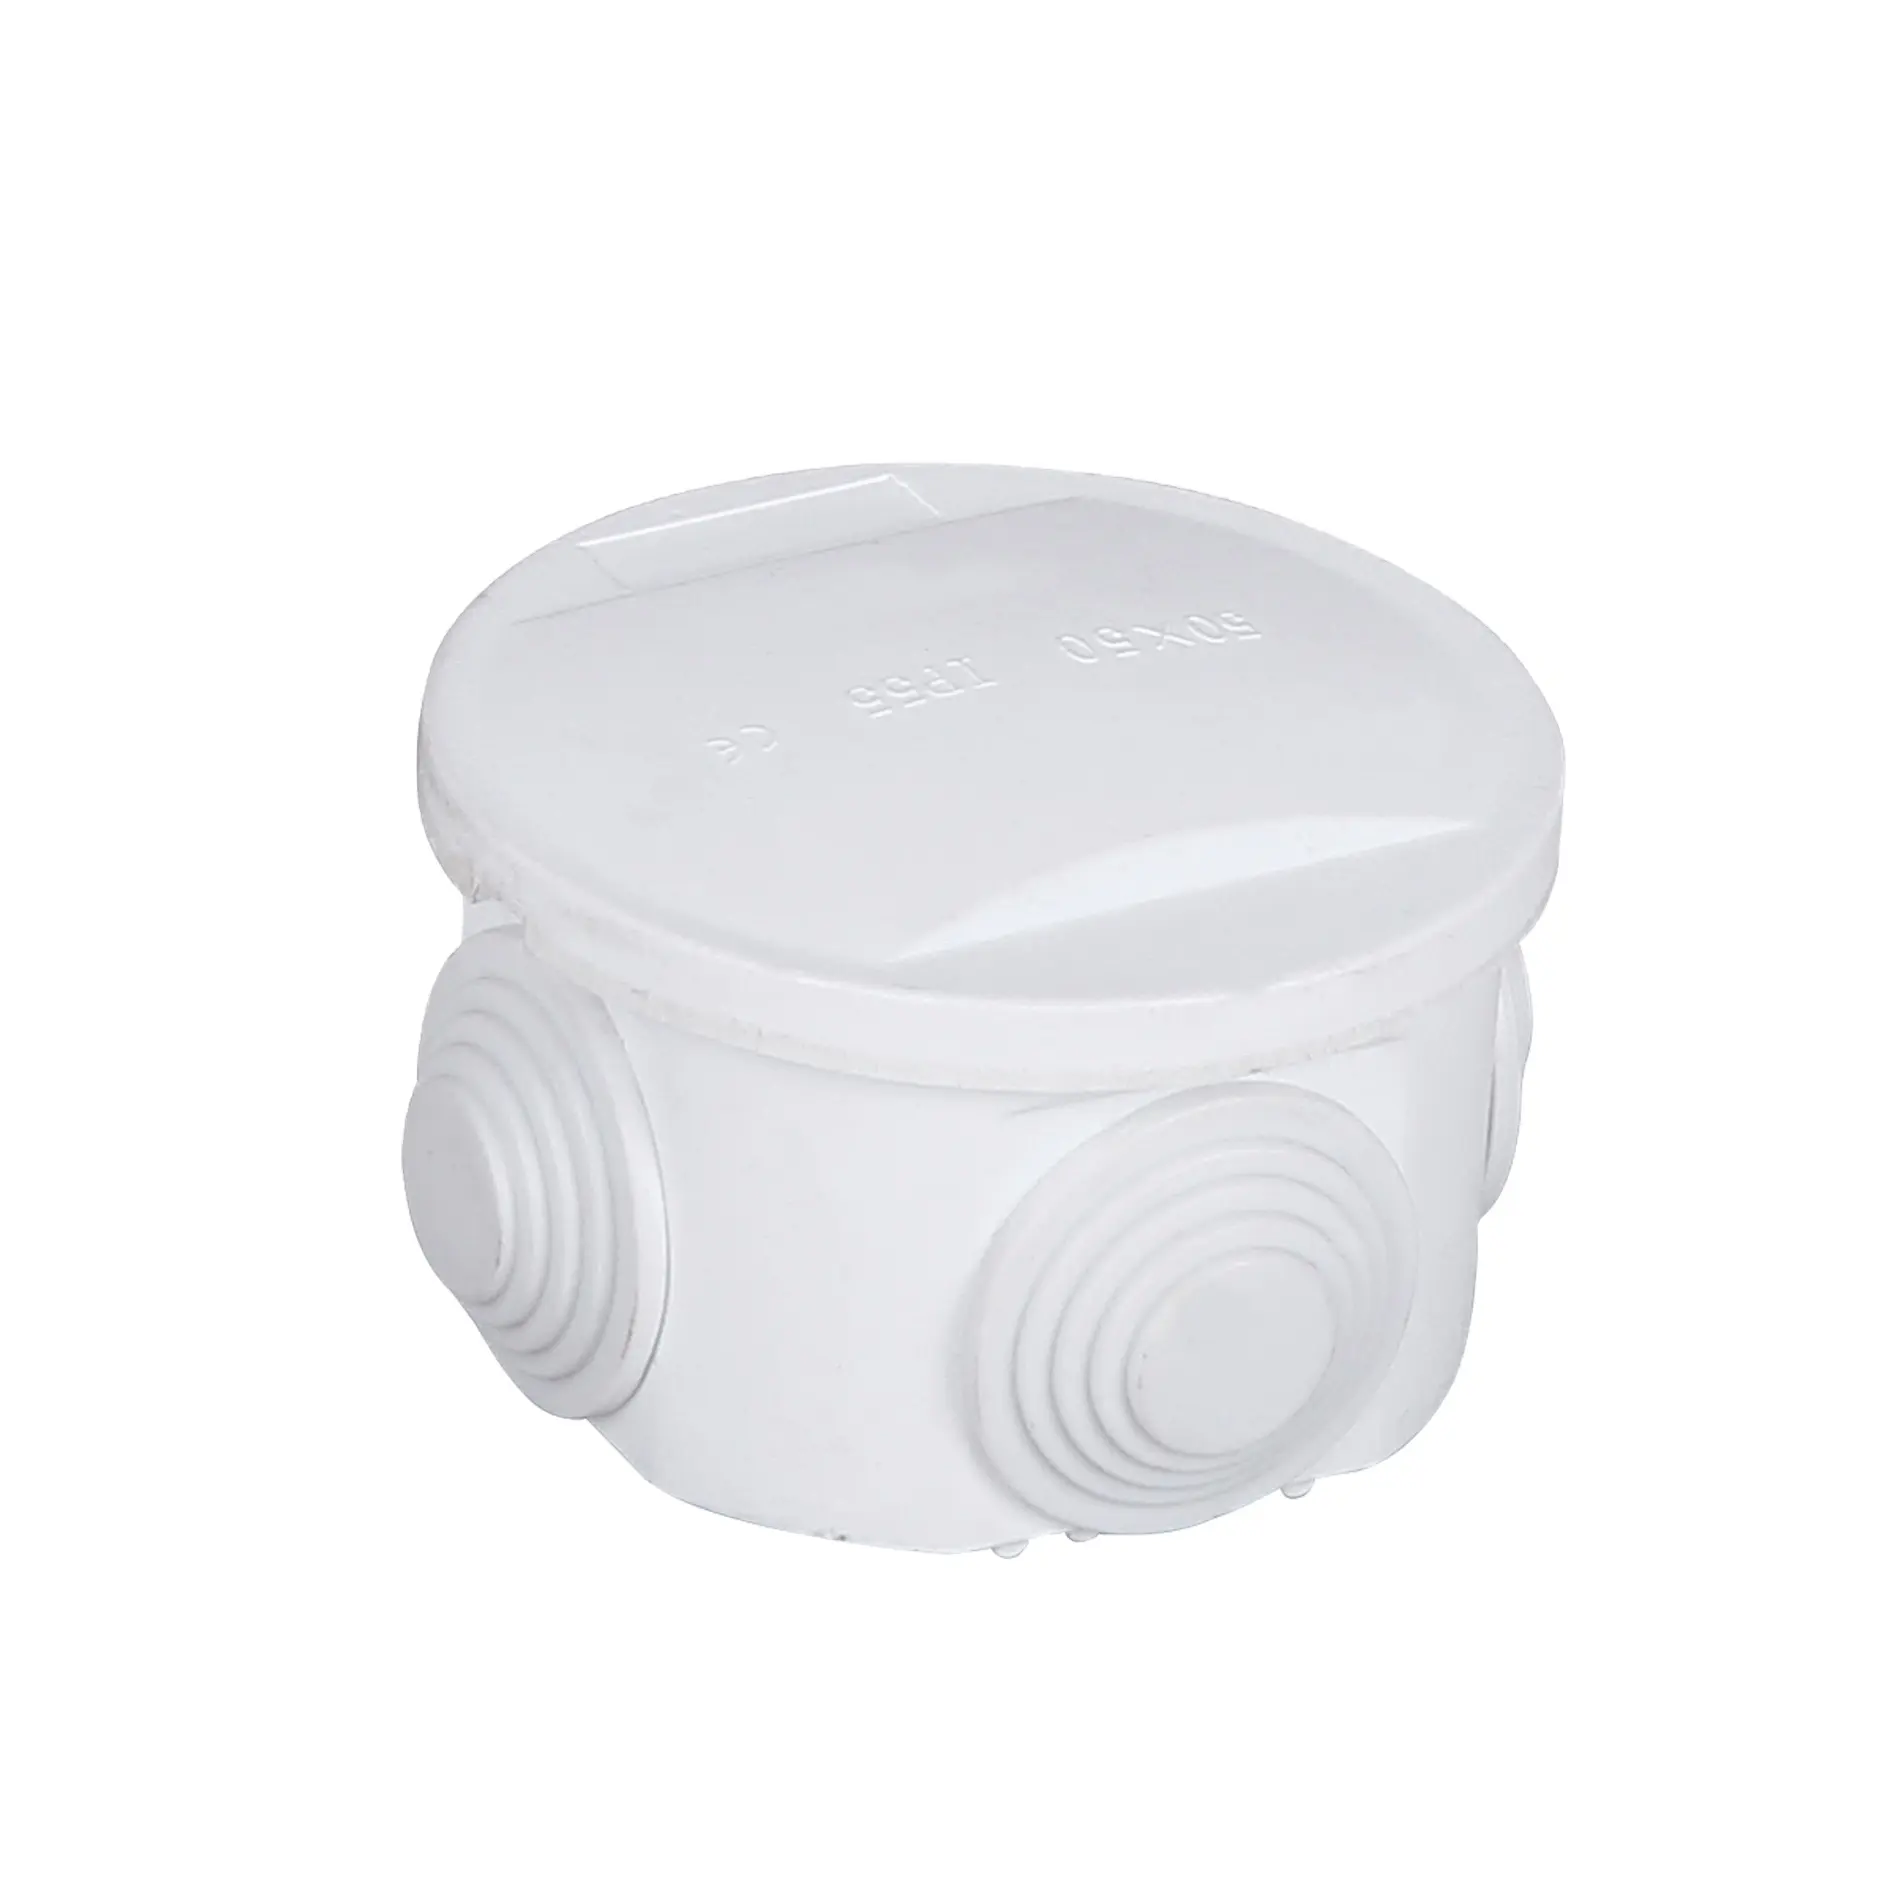 Outdoor Waterproof Electrical Enclosure Instrument Case Housing white Project Plastic Connection Electronic Junction Box